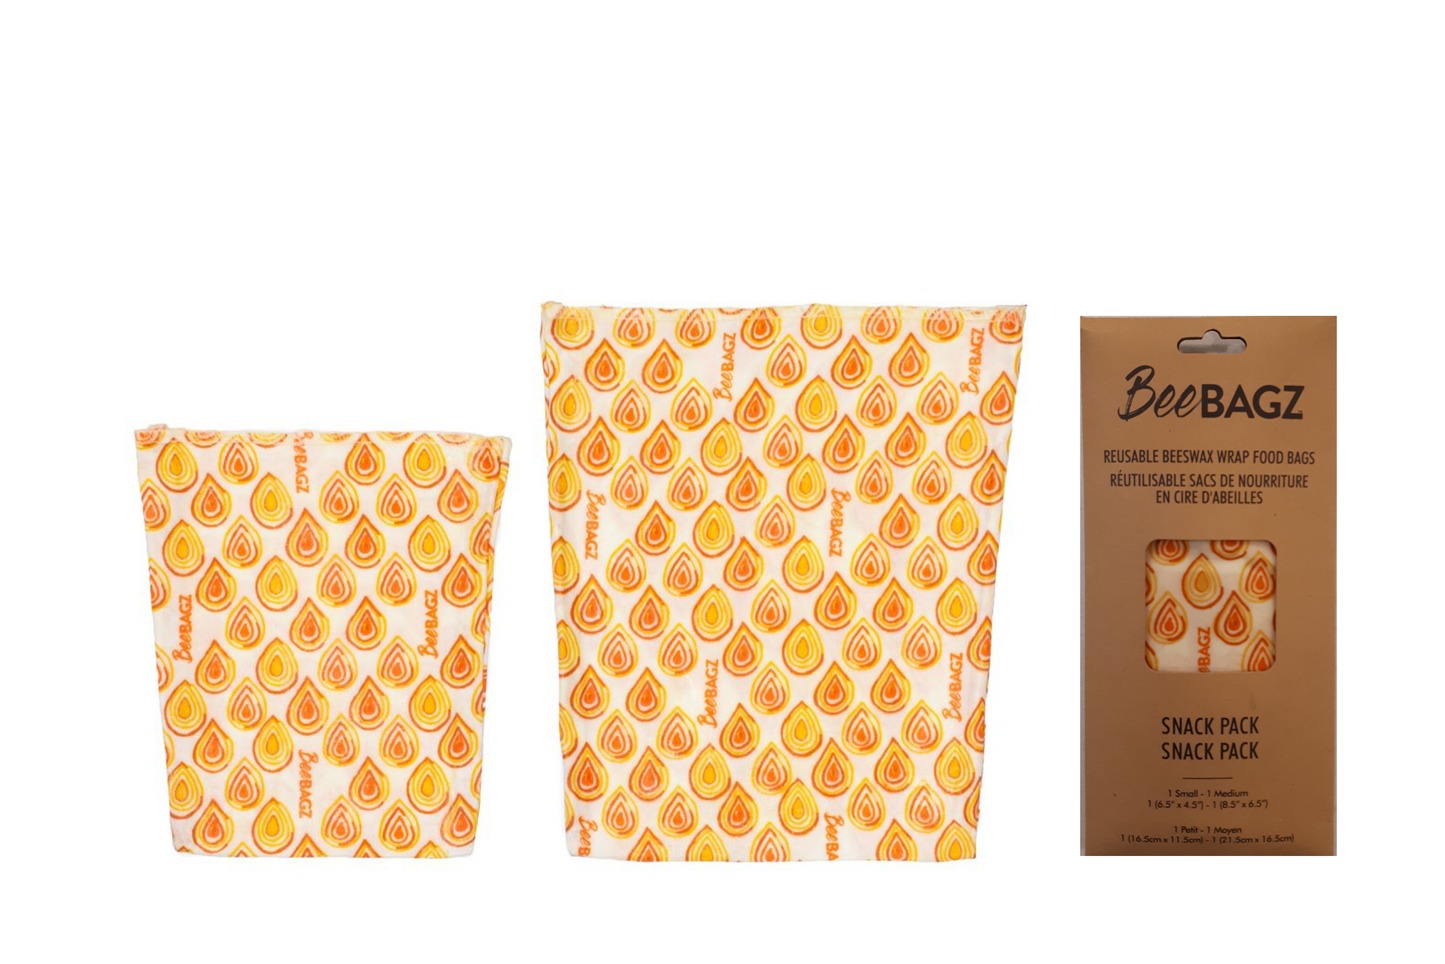 Snack Pack of 2 - Reusable Beeswax Wrap Food Storage Bags